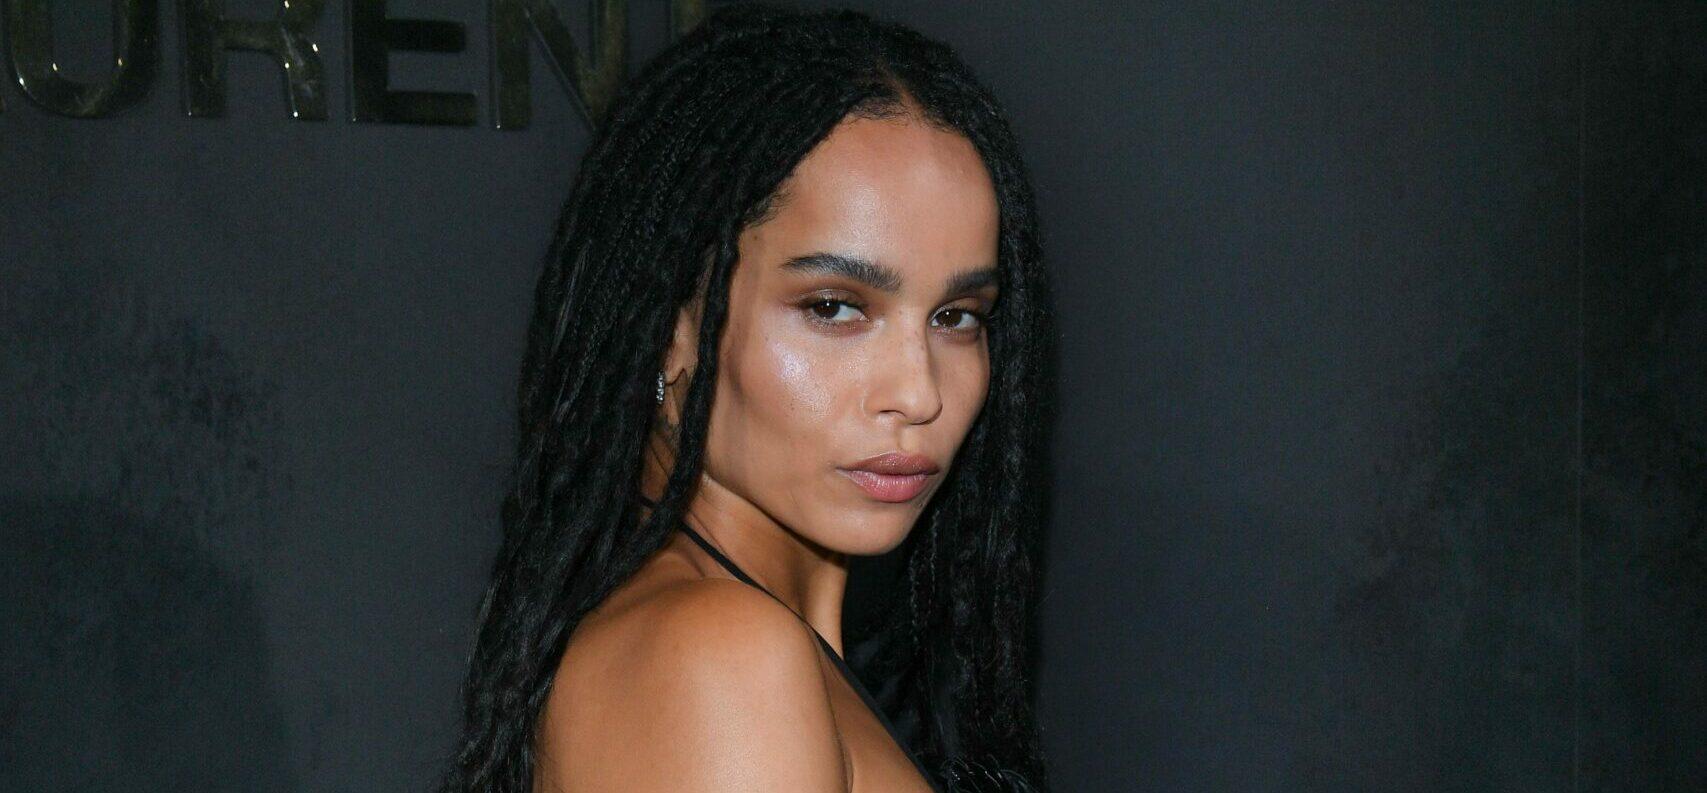 Zoë Kravitz Has Reportedly Filed for Divorce From Karl Glusman 18 after their wedding in Paris